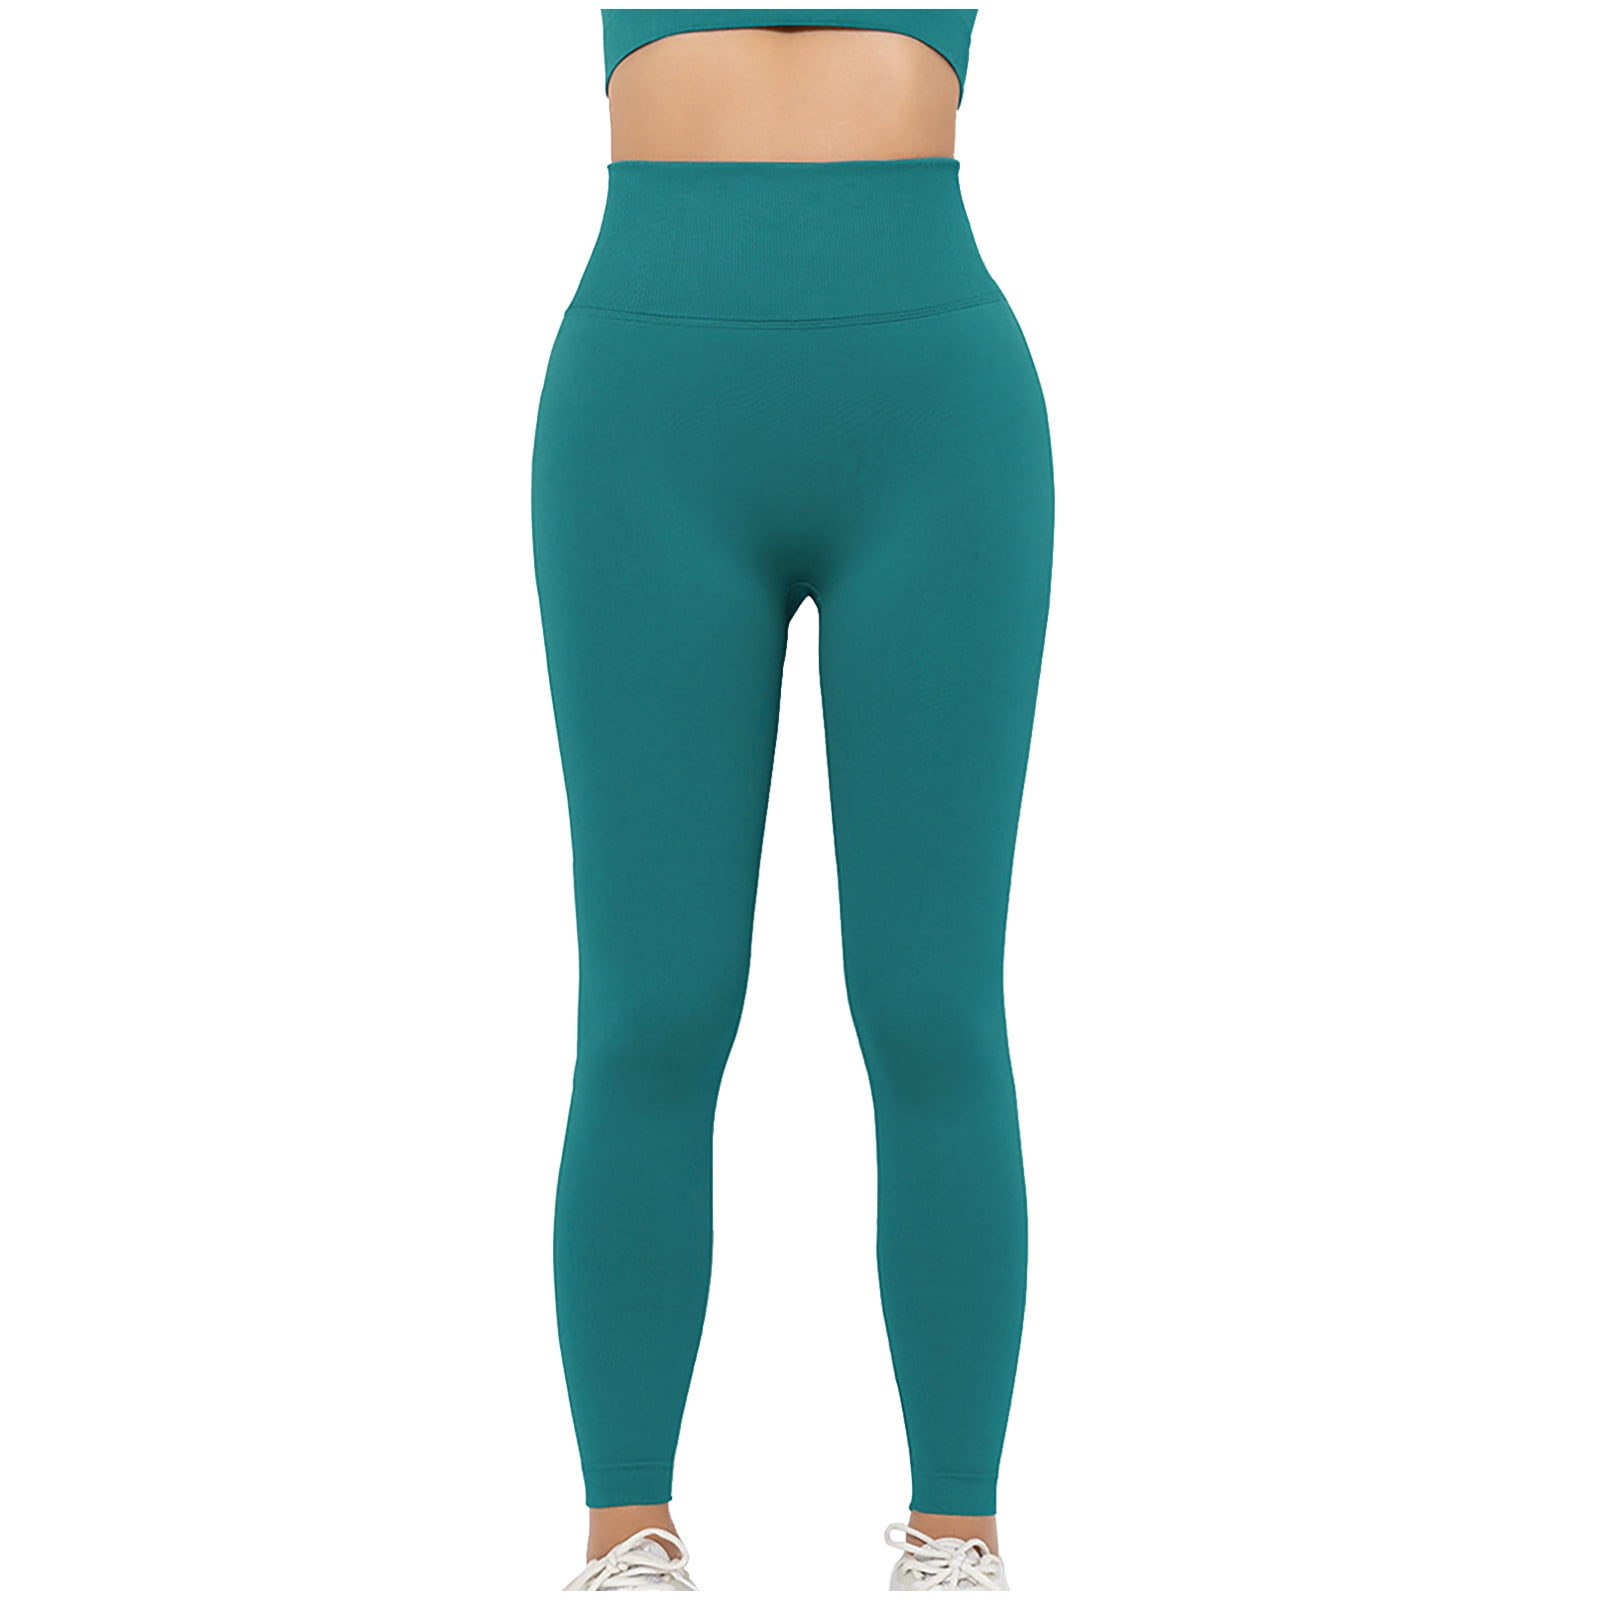 Scrunch Workout Leggings for Women Stretch High Waisted Tummy Control ...